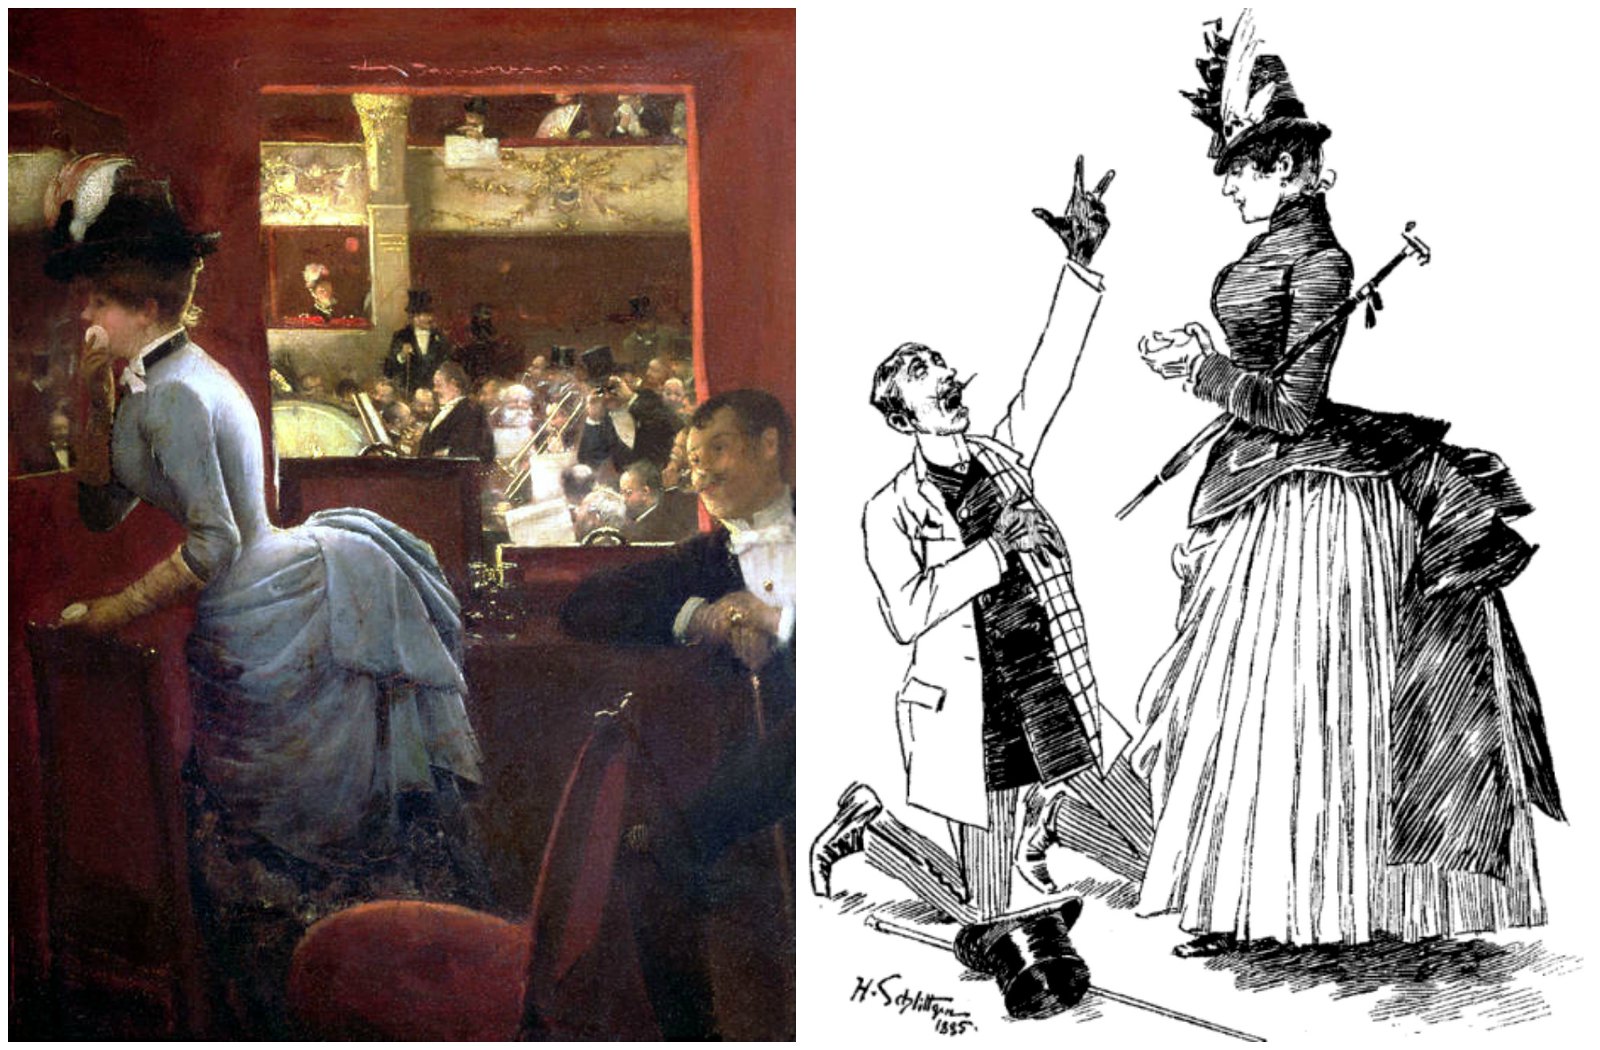 Left: The Box by the Stalls by Jean-Georges Béraud – 1883. Right: An 1885 proposal caricature